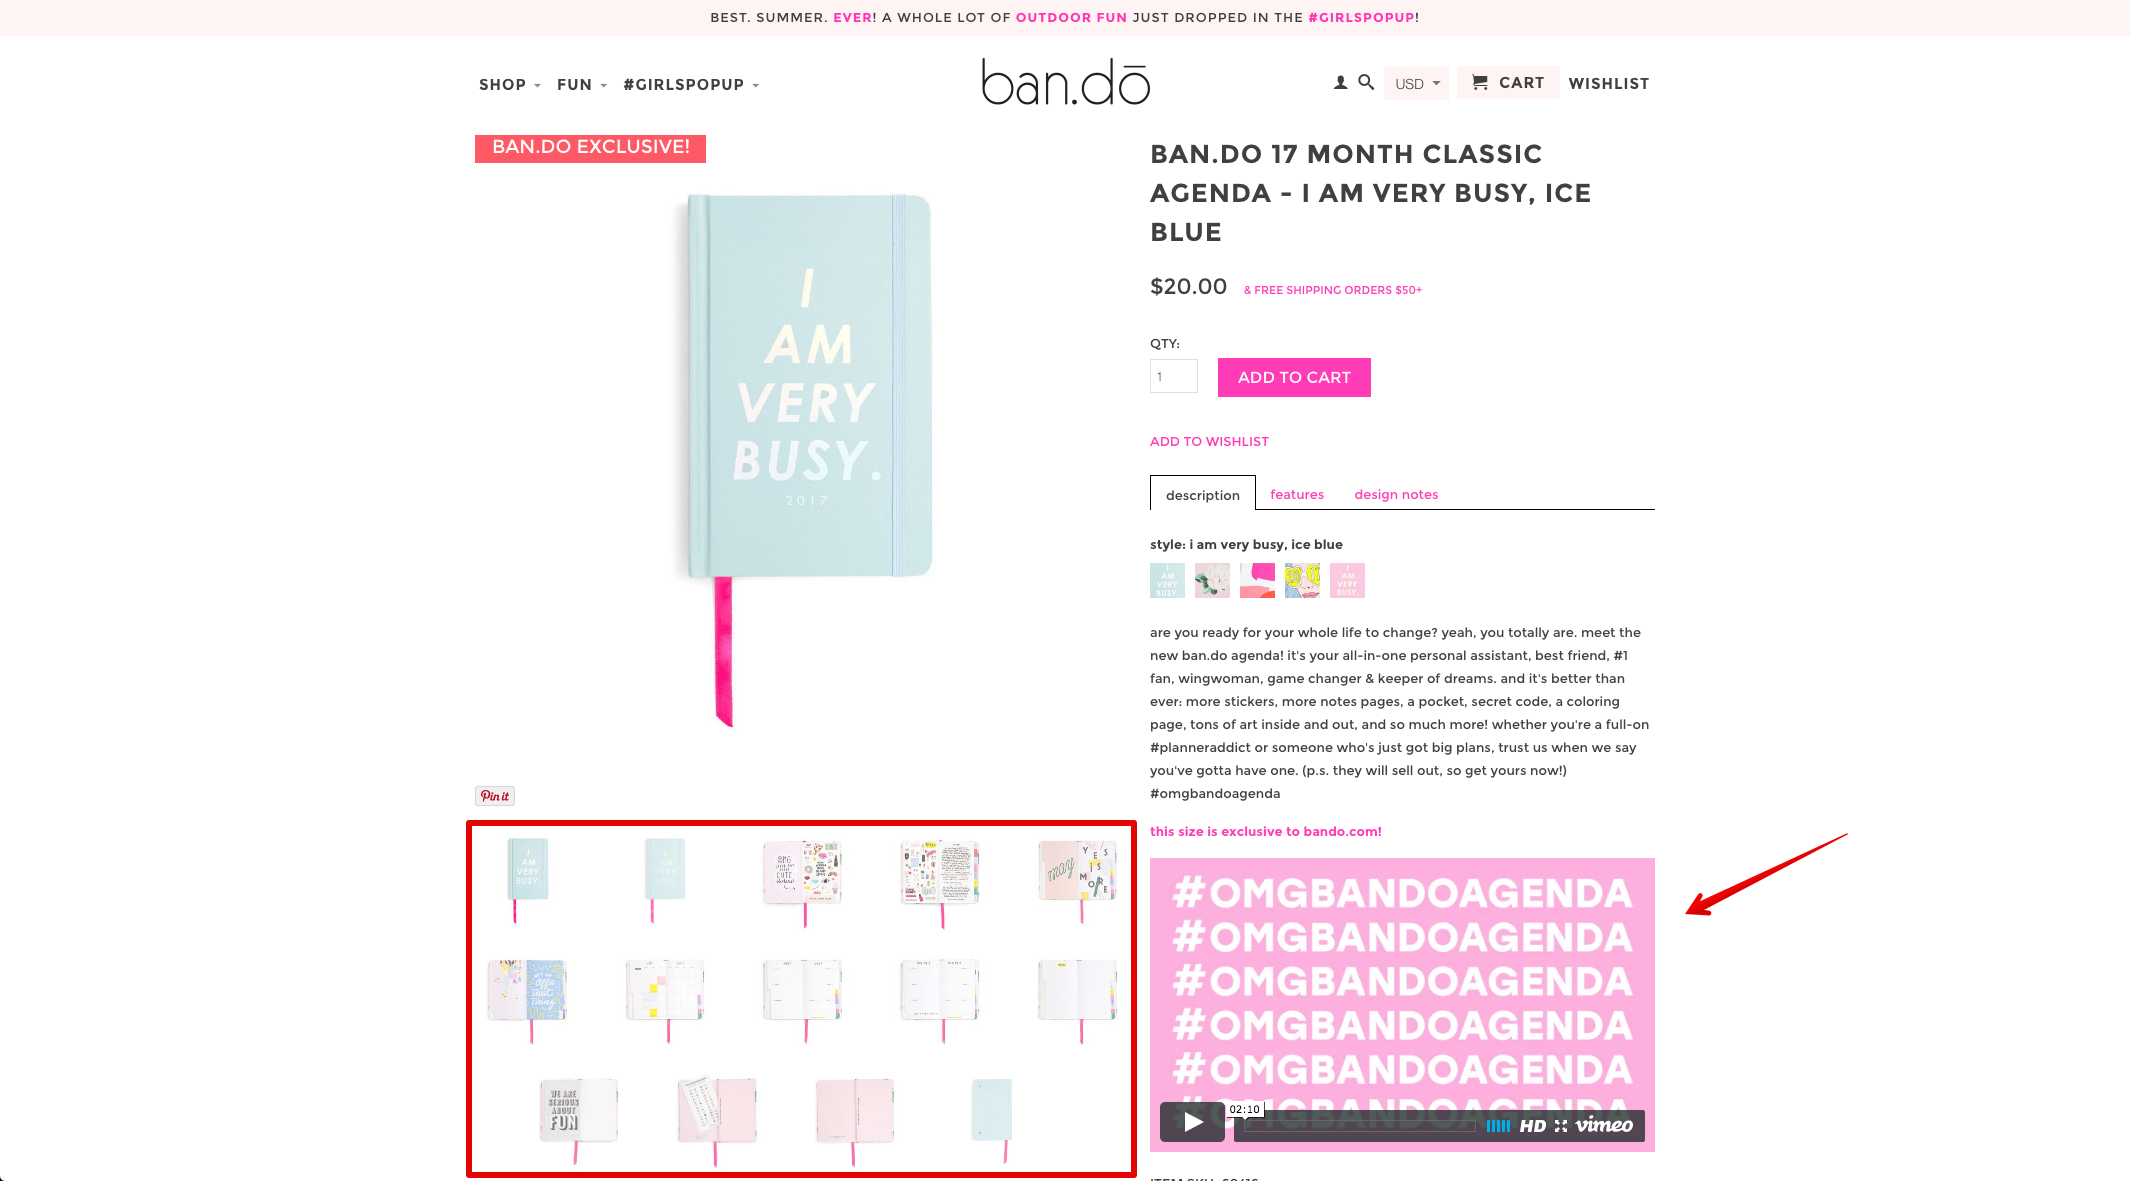 bando product pages